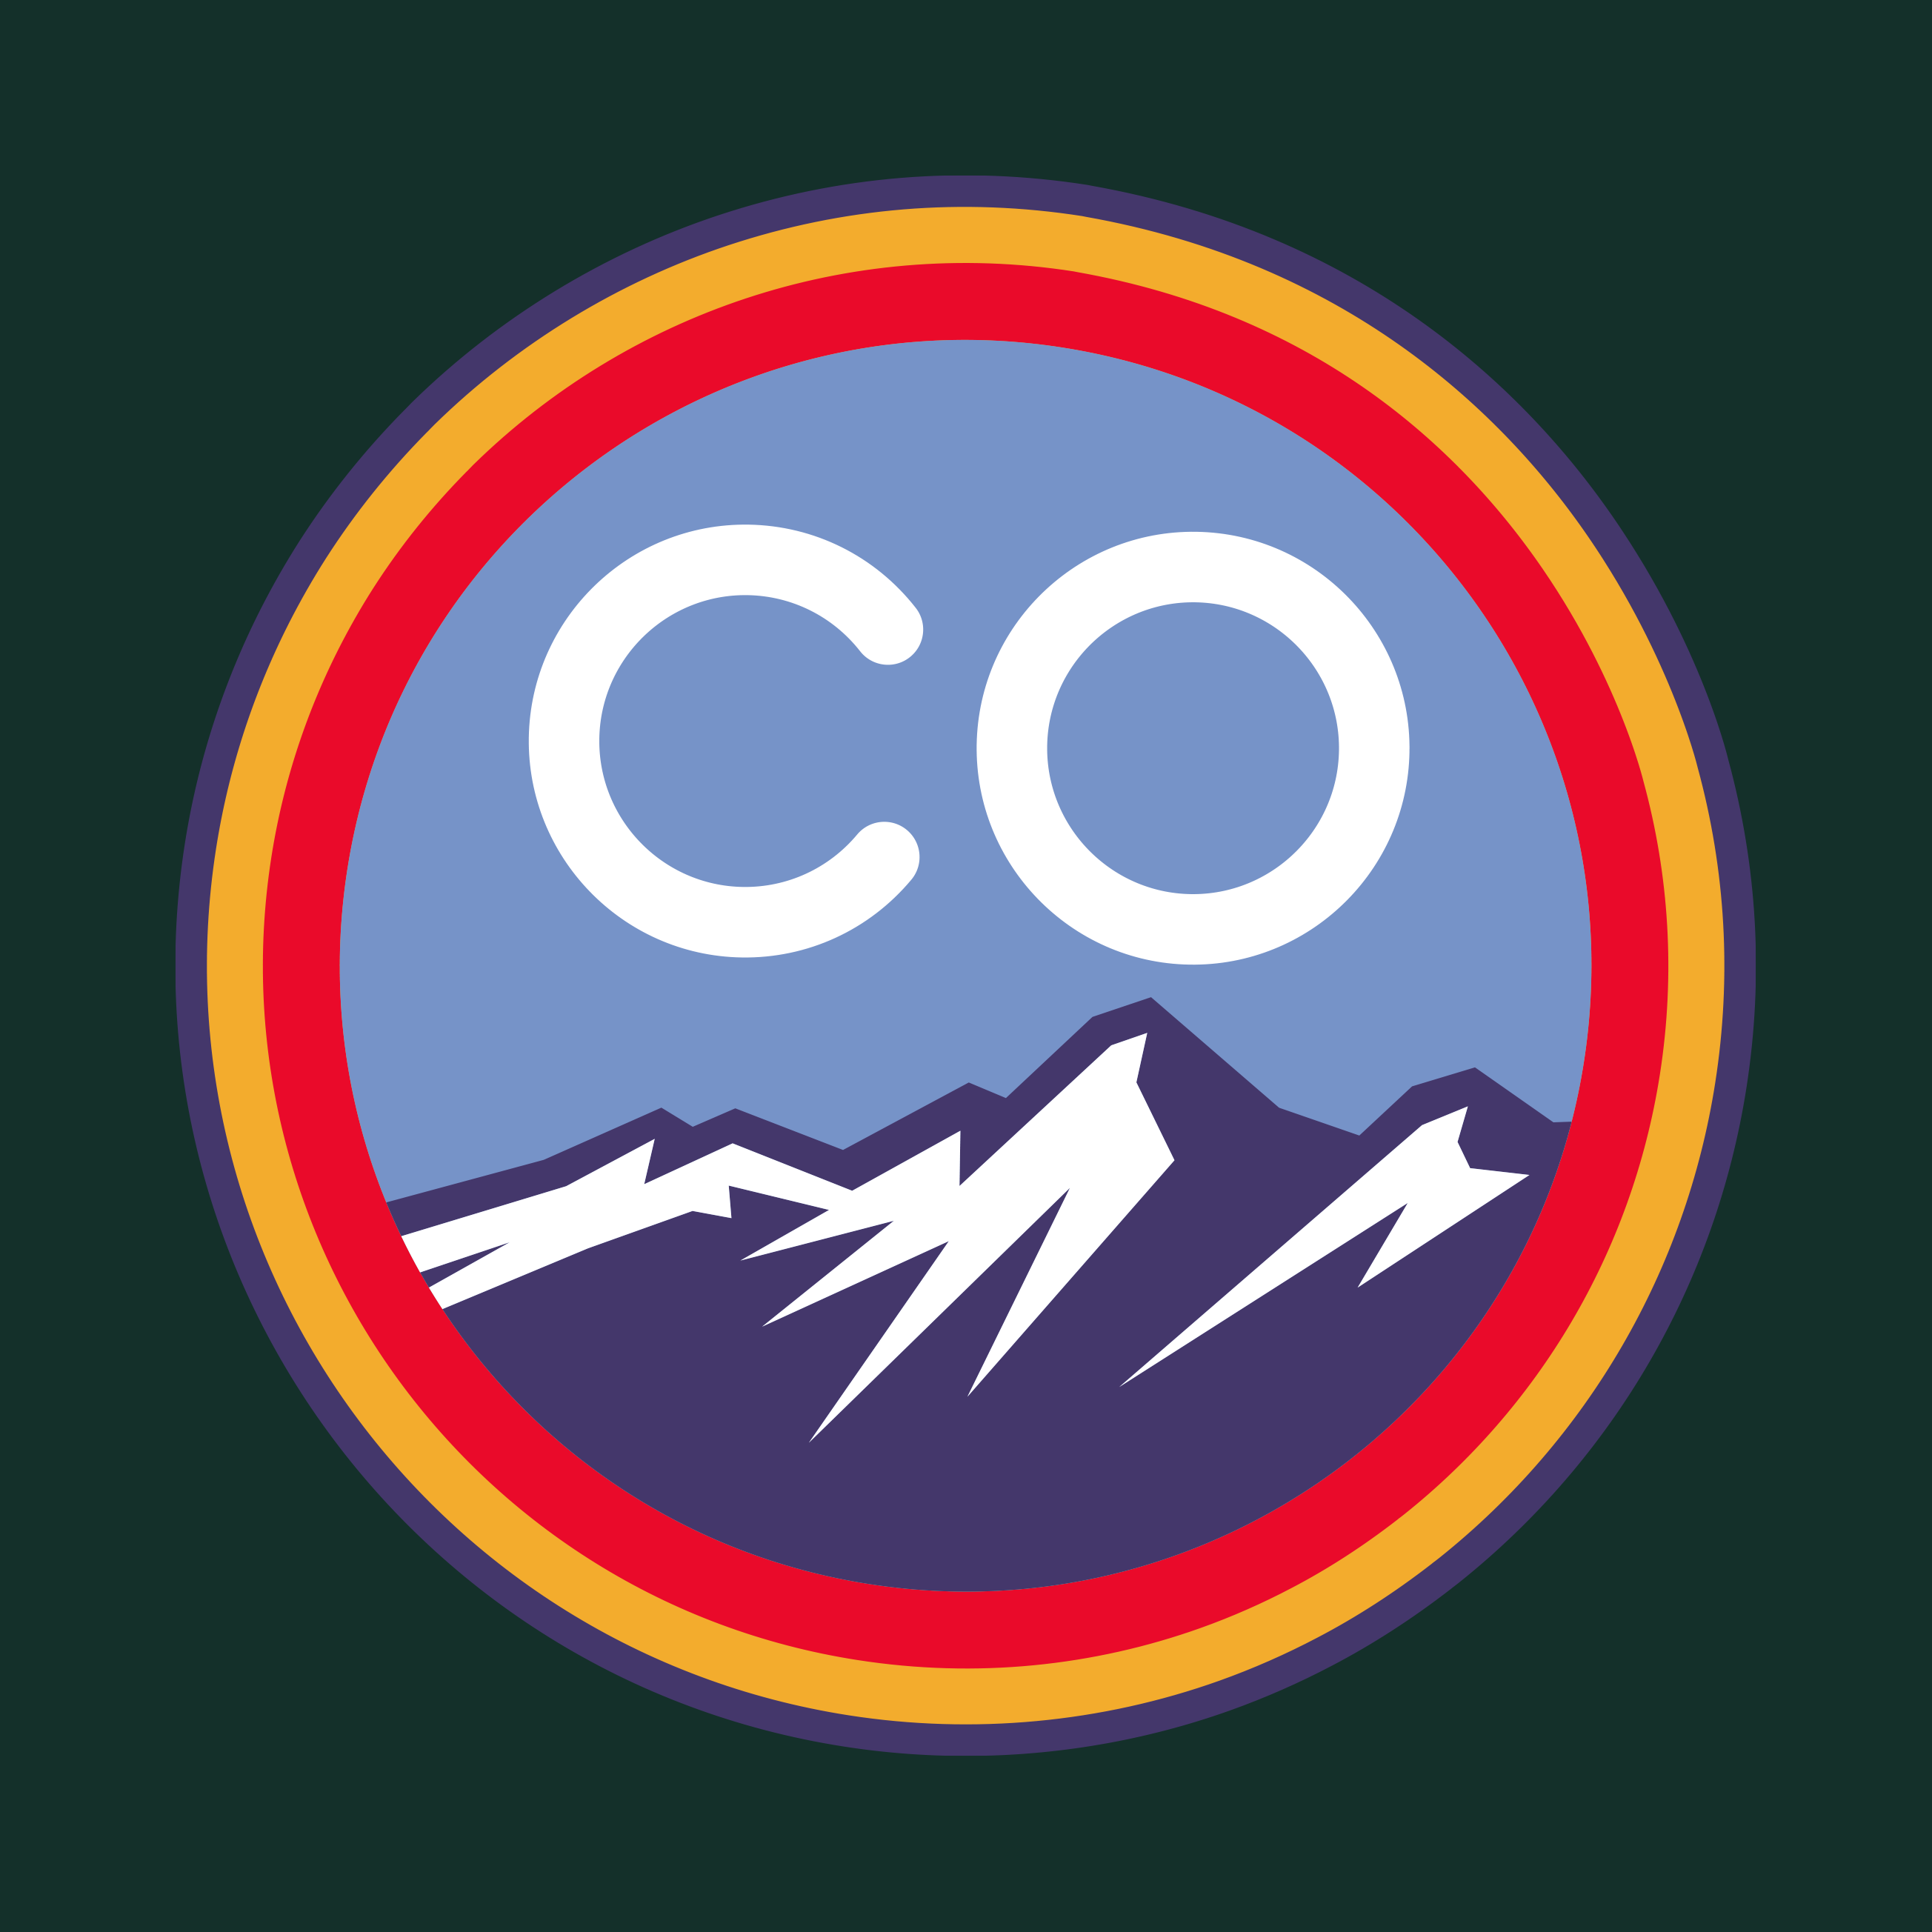 Colorado Rockies news: The 2023 Promotional Calendar: Which games